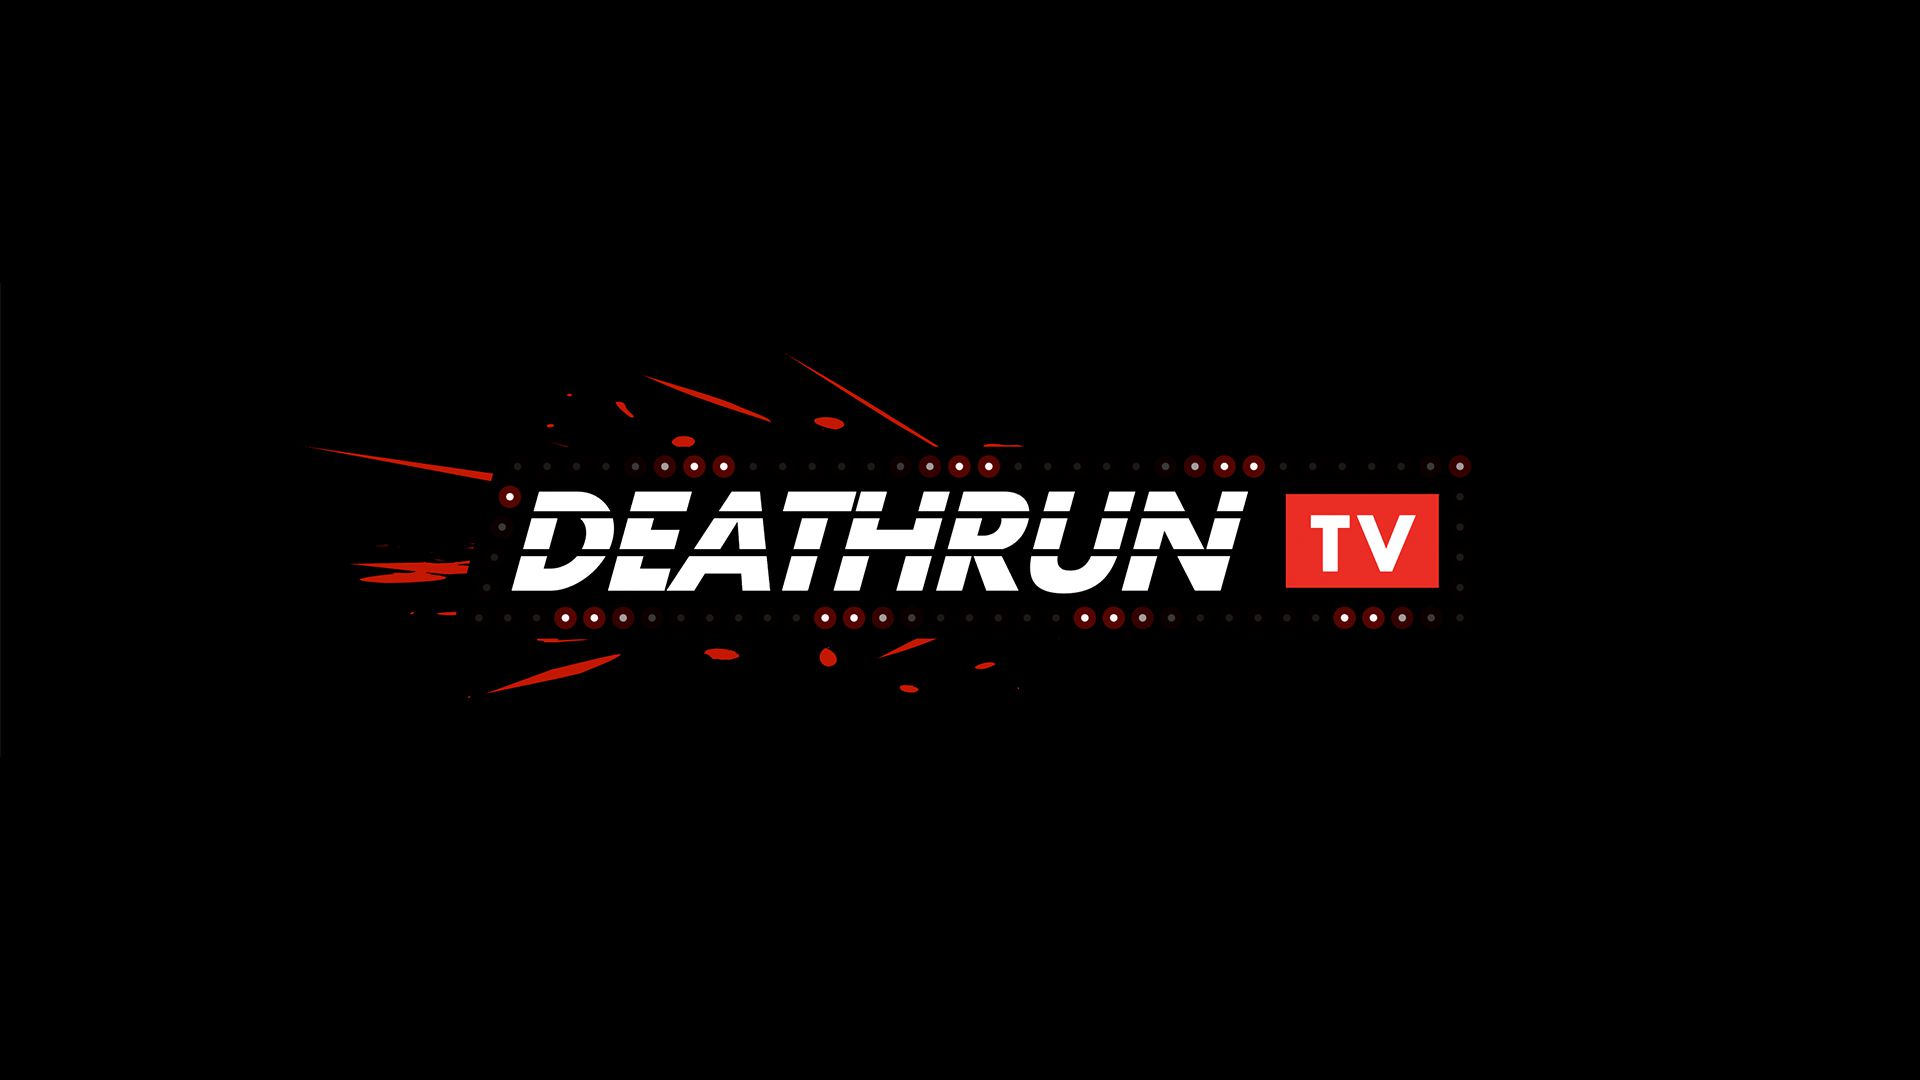 DEATHRUN TV download the new version for iphone